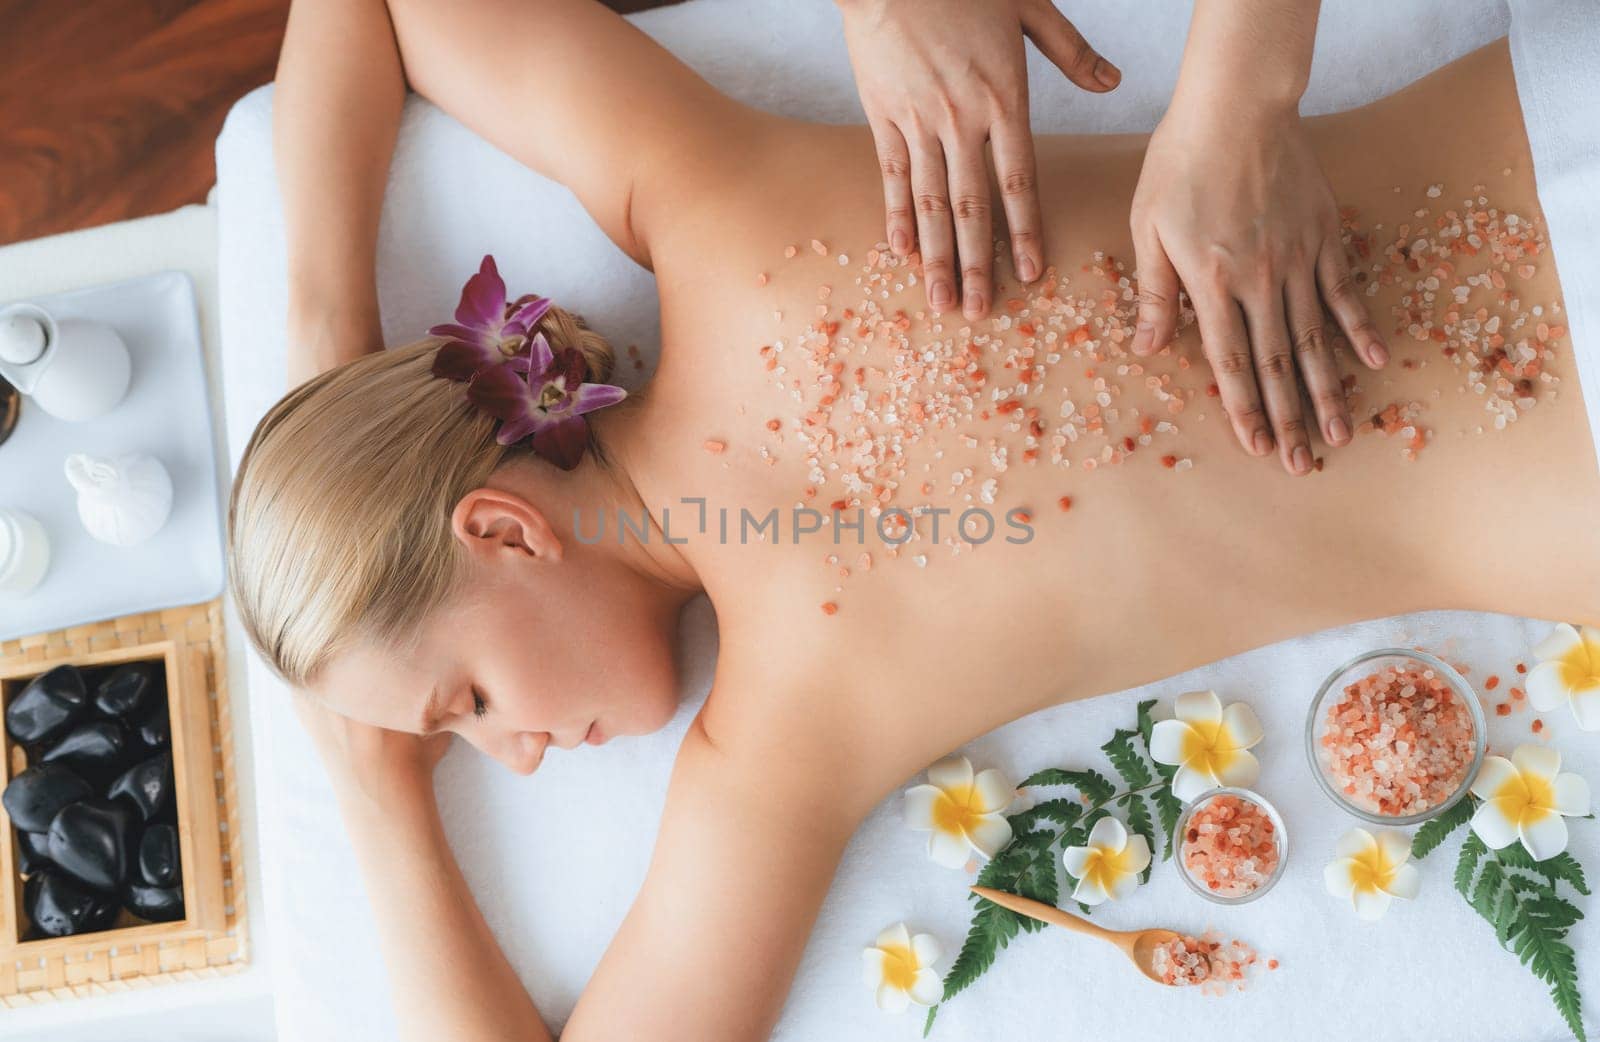 Panorama top view woman customer having exfoliation treatment in luxury spa salon with warmth candle light ambient. Salt scrub beauty treatment in health spa body scrub. Quiescent